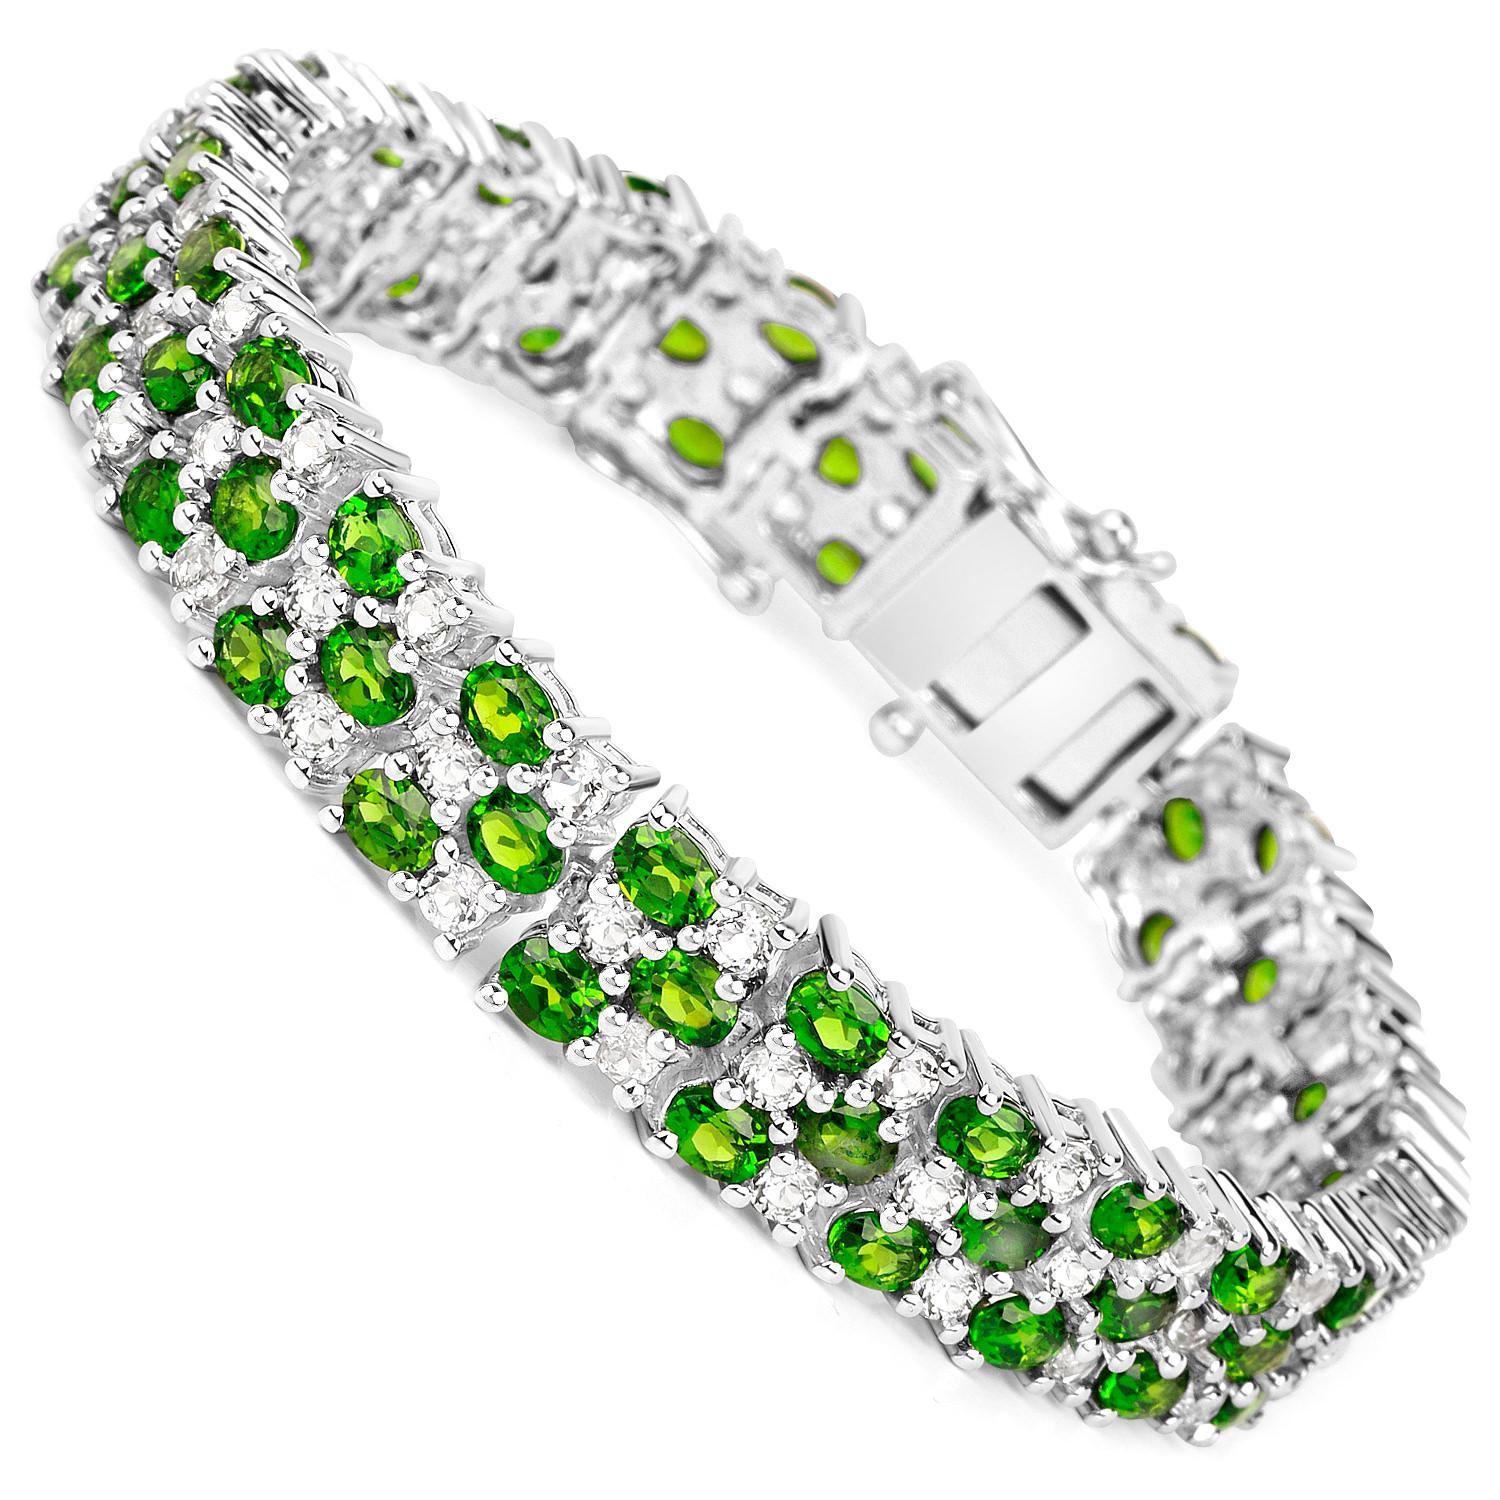 Contemporary Chrome Diopside Tennis Bracelet With White Topazes 17.28 Carats Rhodium Plated S For Sale